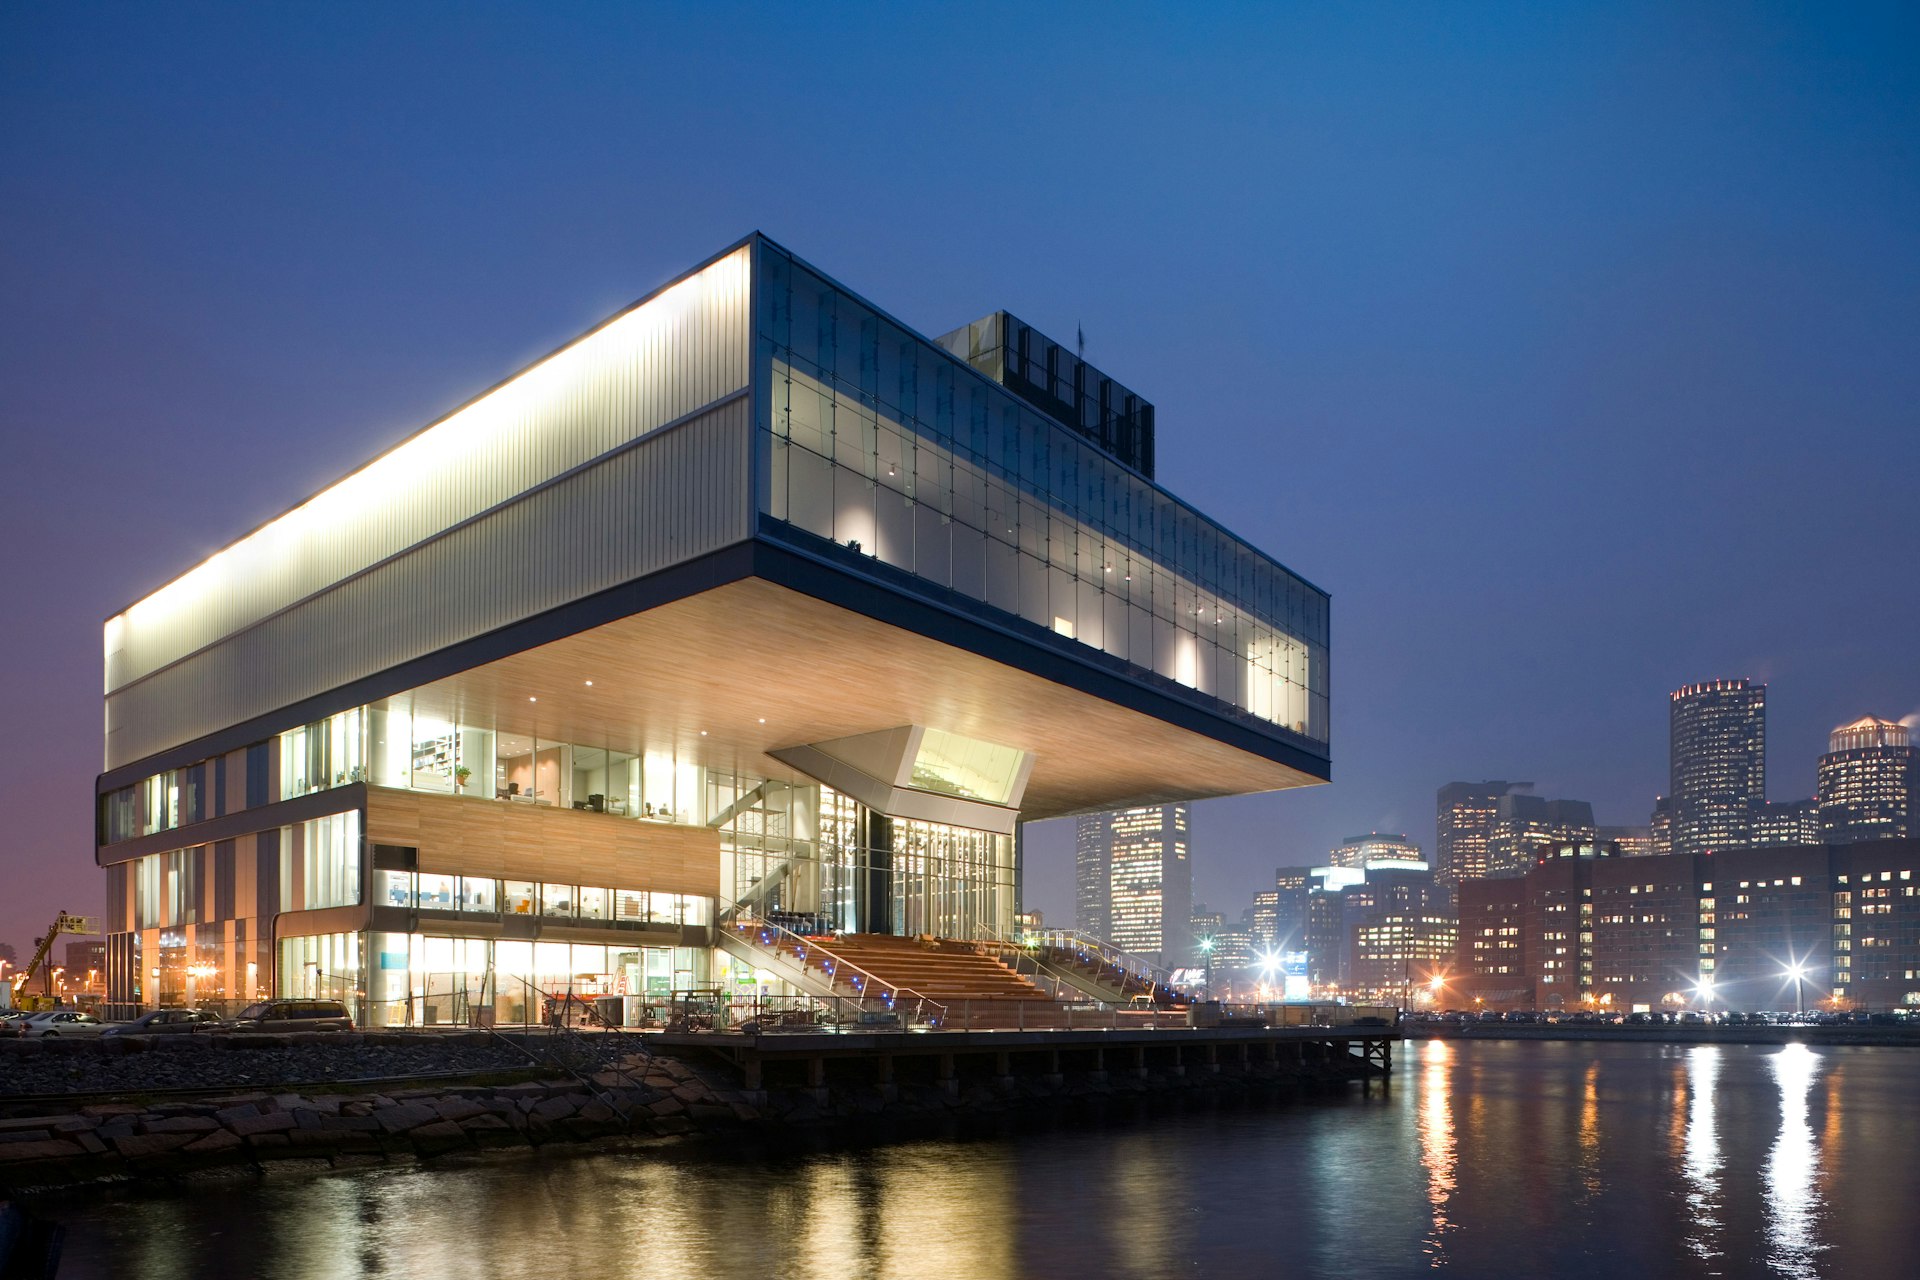 The harbor-front Institute of Contemporary Art. Image by Smart Destinations / CC BY-SA 2.0